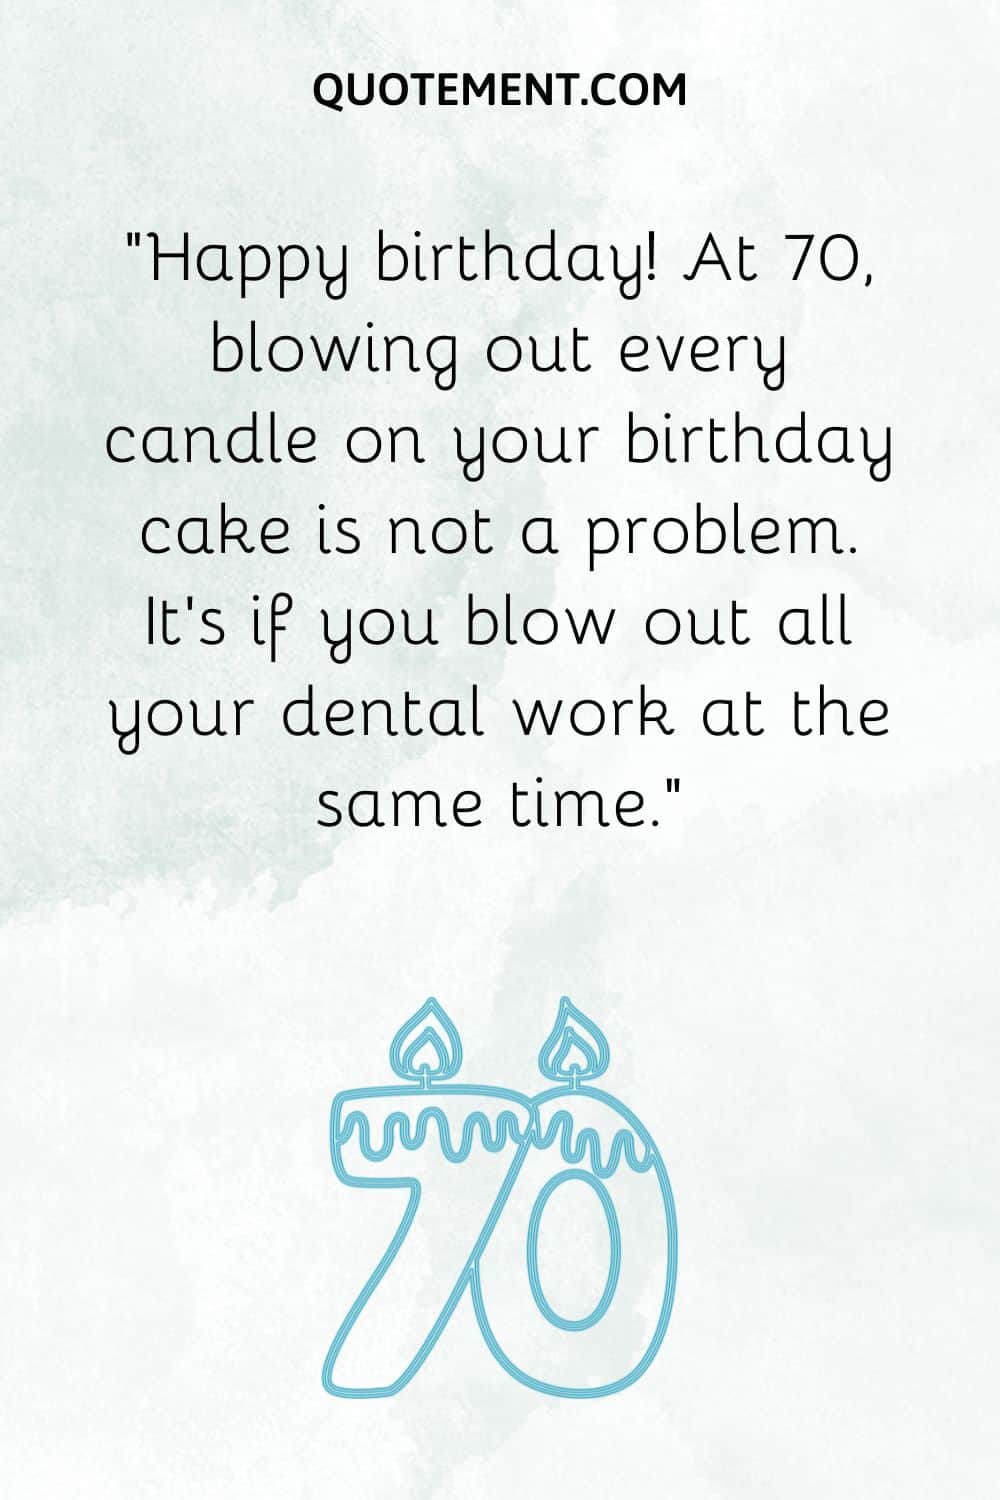 “Happy birthday! At 70, blowing out every candle on your birthday cake is not a problem. It's if you blow out all your dental work at the same time.”